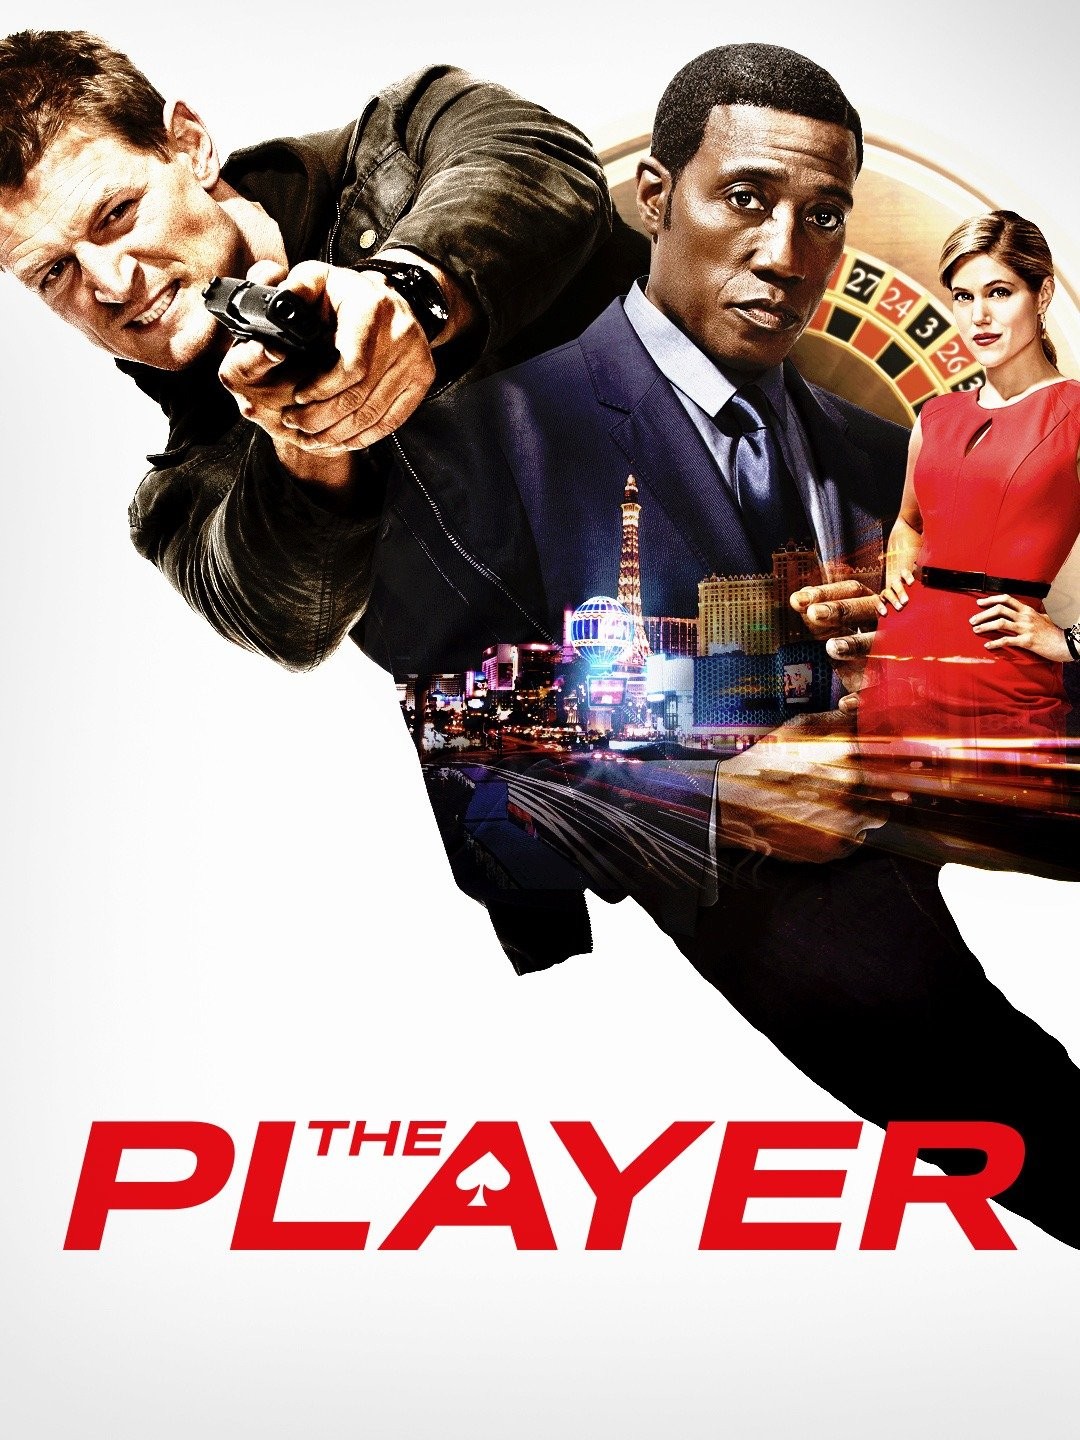 The Players (2020) - Filmaffinity